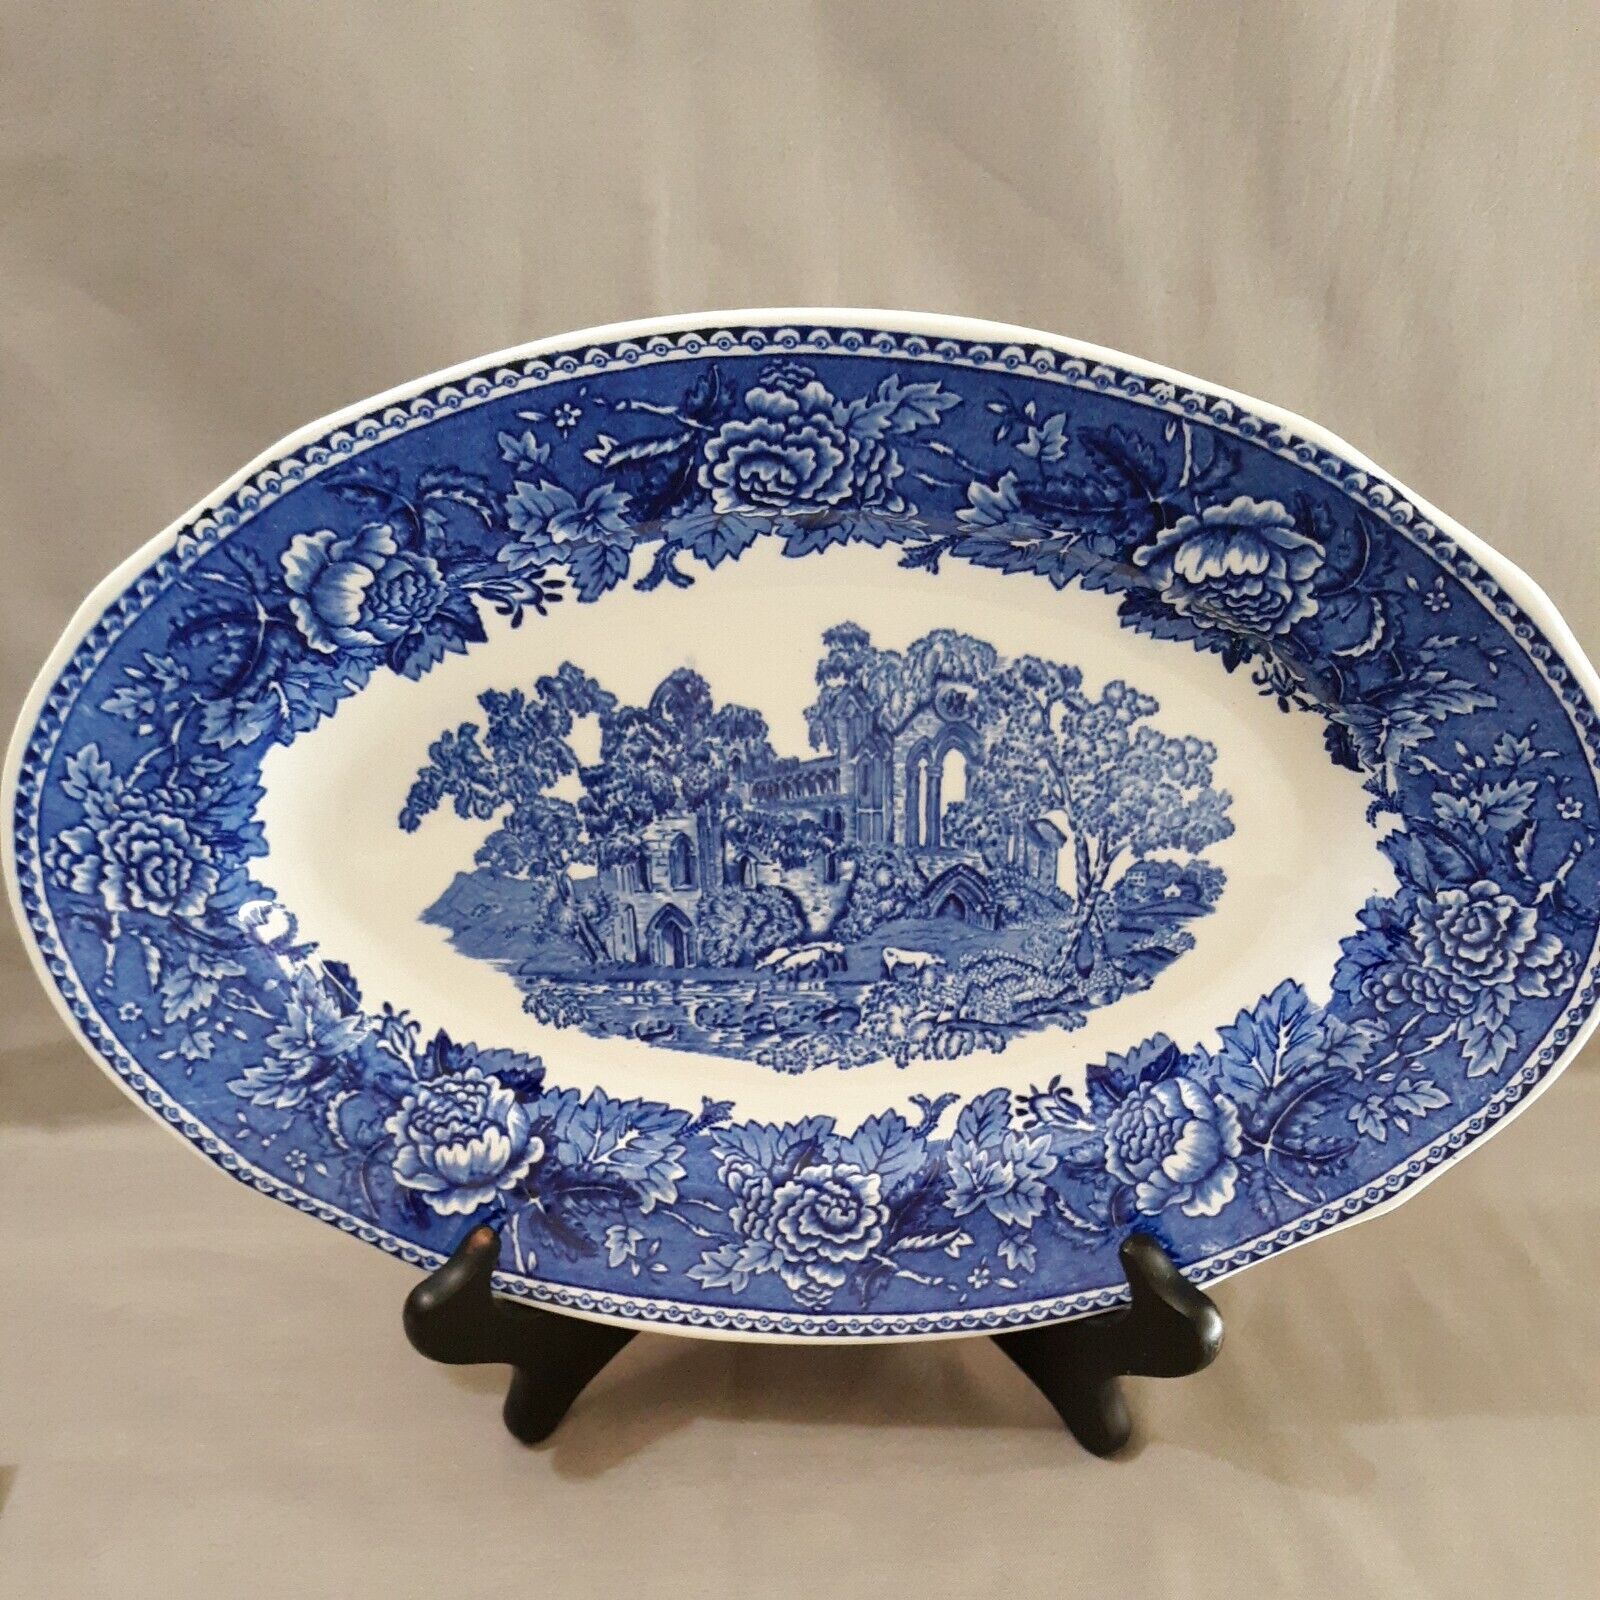 Read more about the article Vintage Arabia Finland Landscape Blue 12 7/8″ Oval Platter Florals Sheep Ruins